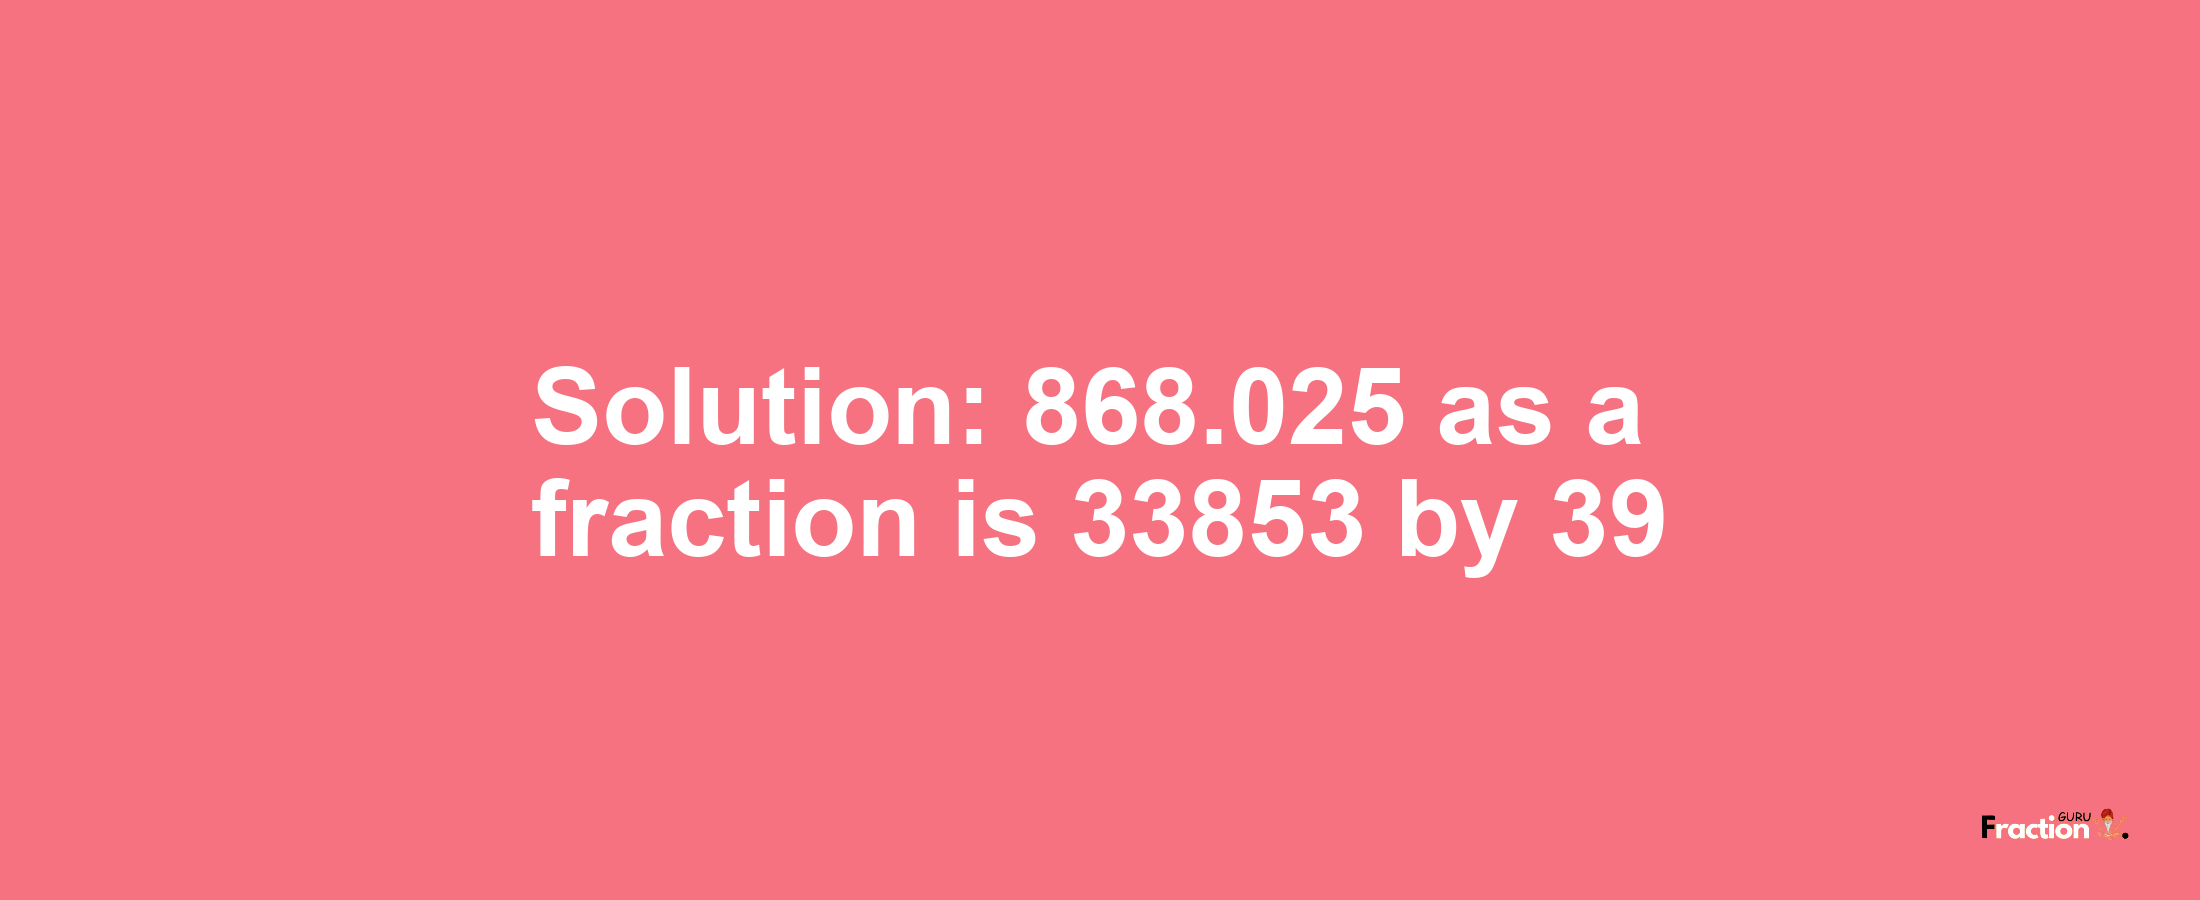 Solution:868.025 as a fraction is 33853/39